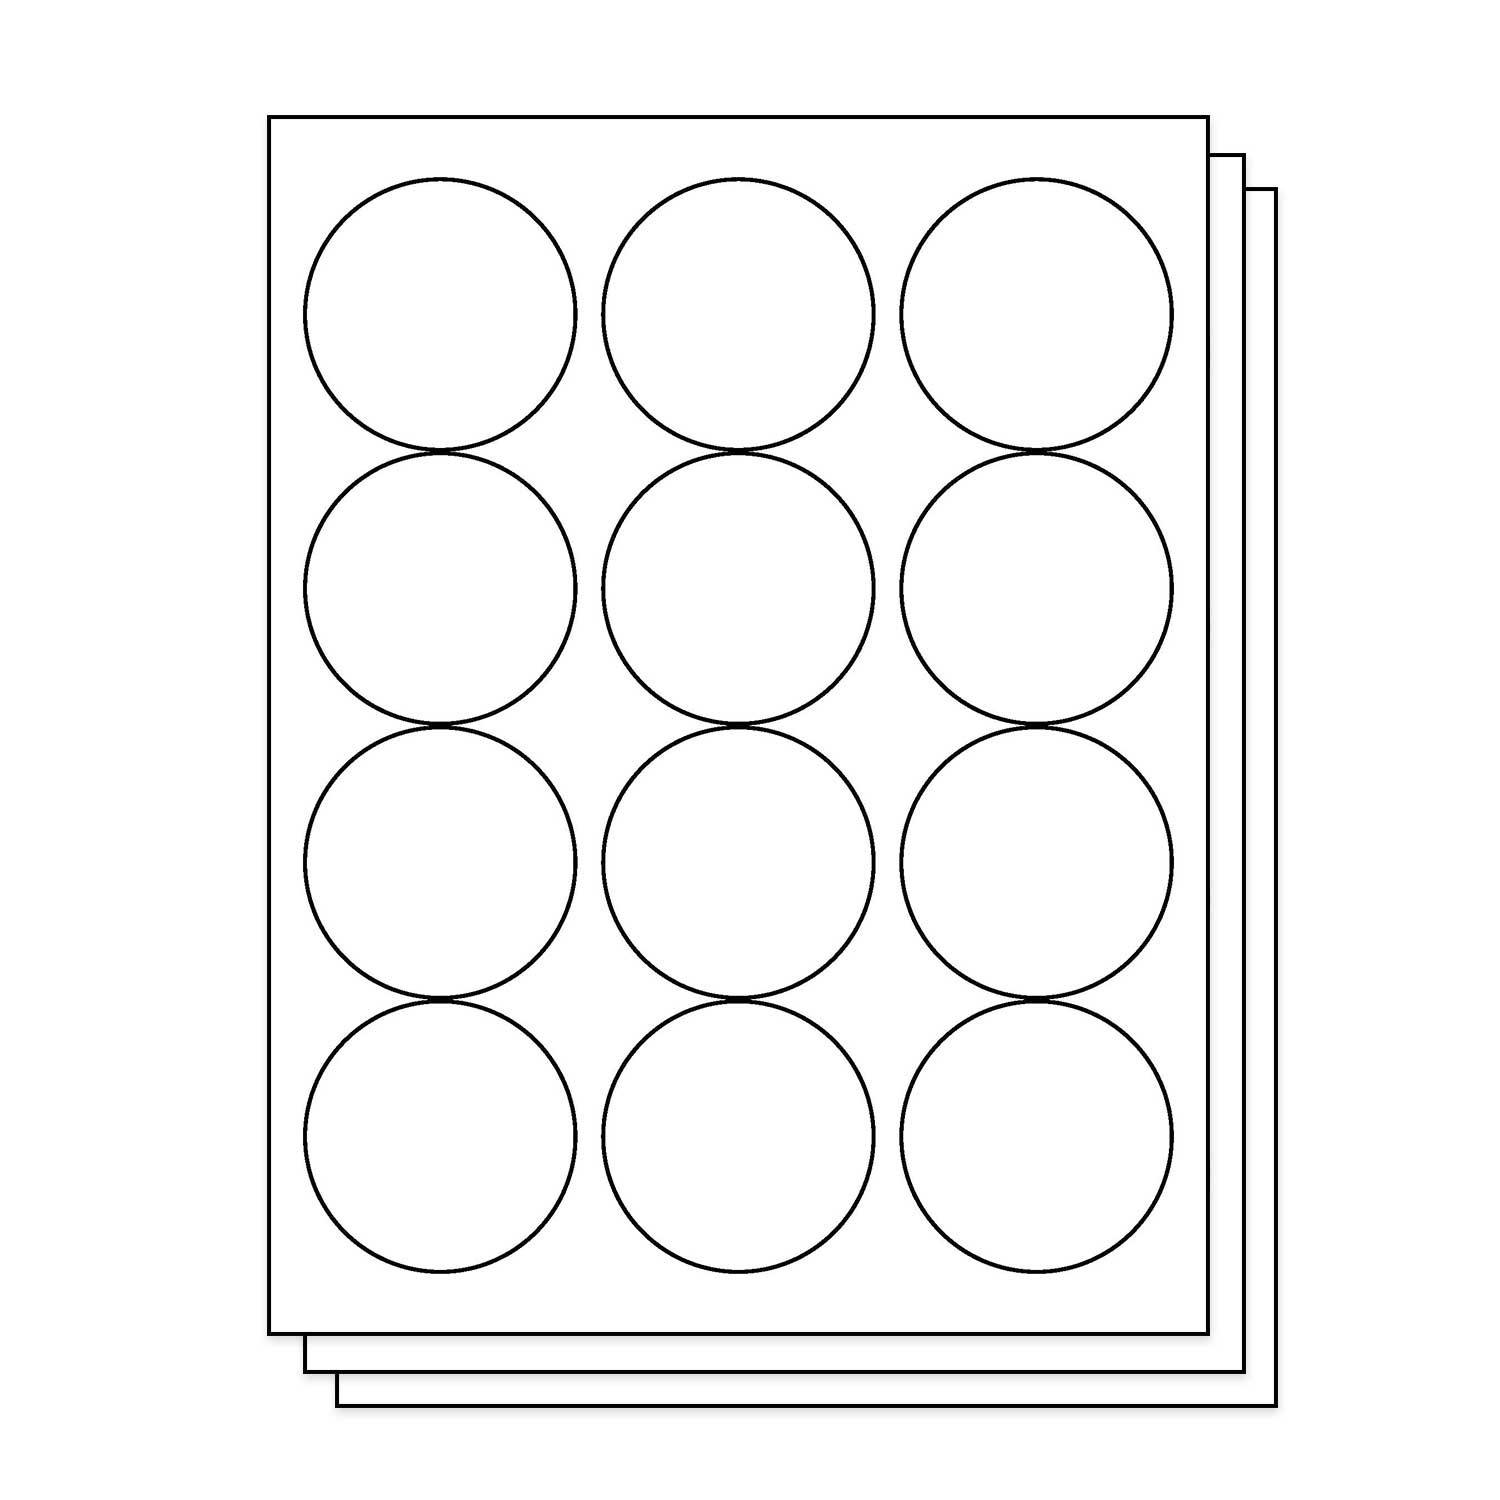 1 12 inch circle template